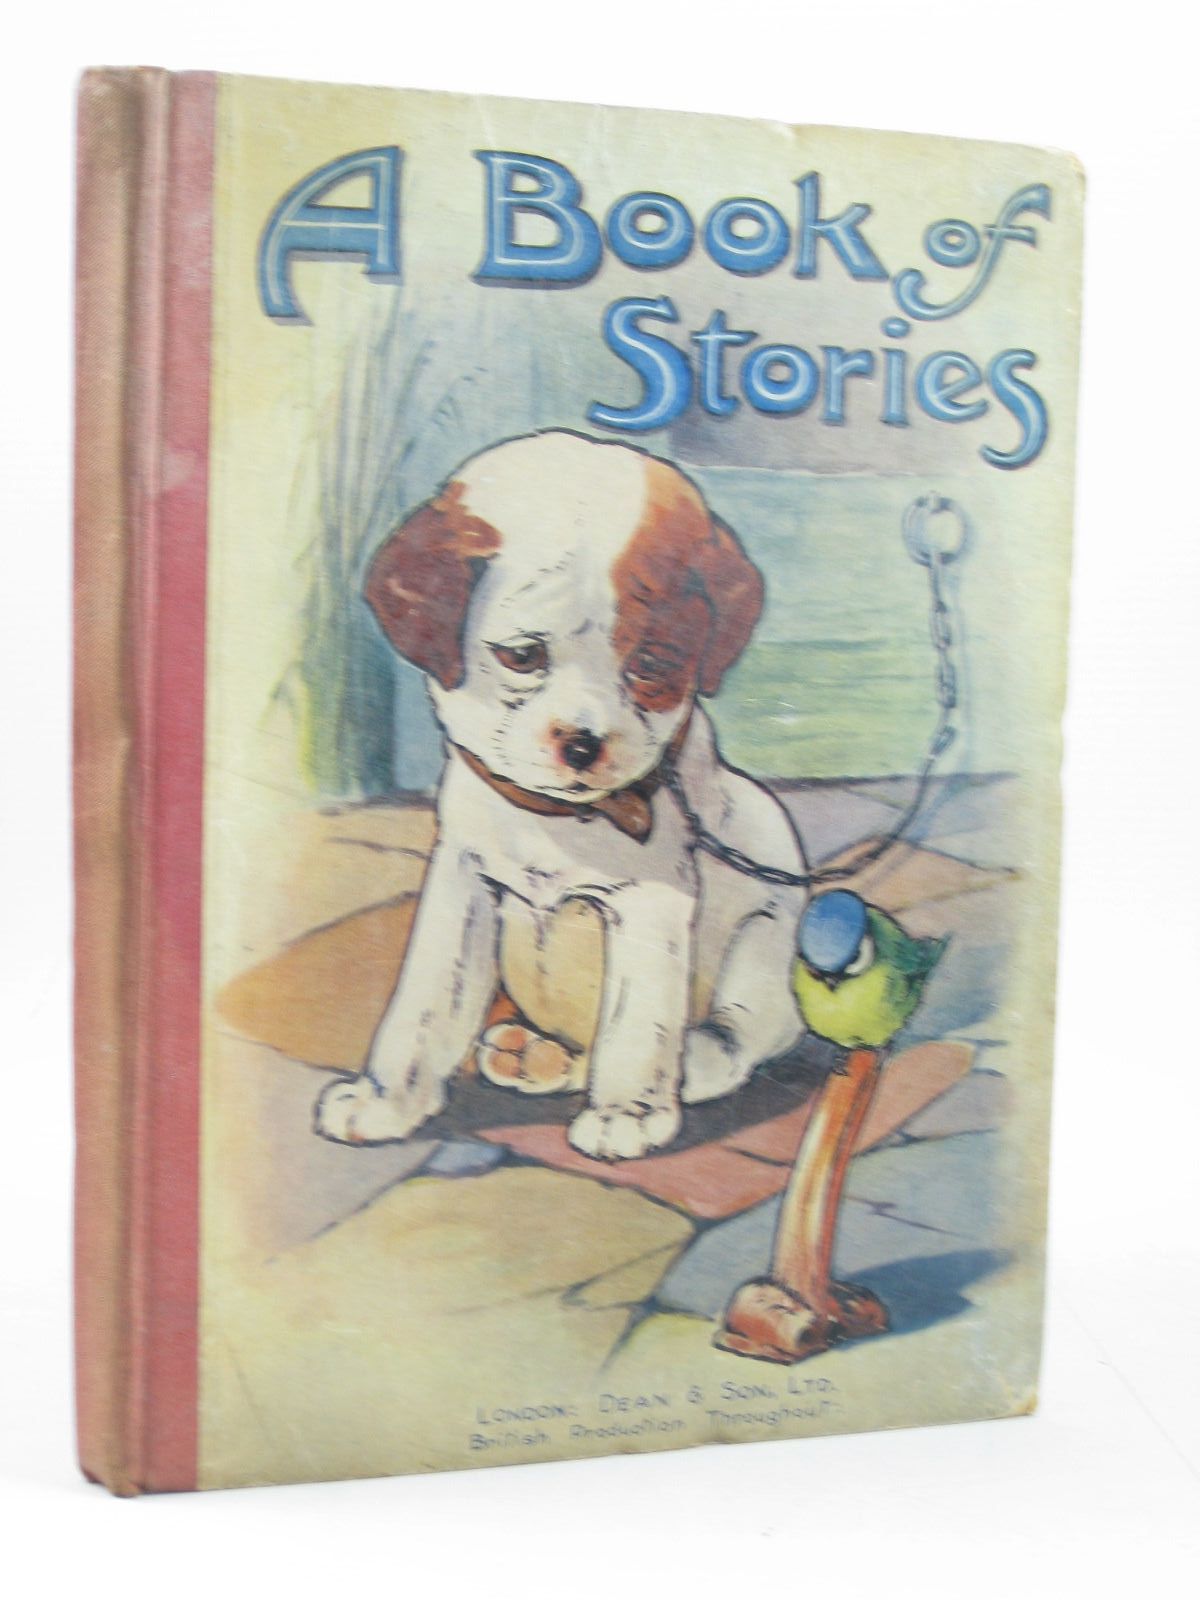 Photo of A BOOK OF STORIES written by Hargrave, Gordon Talbot, Ethel MacNair, J.H. et al, illustrated by Anderson, Anne et al., published by Dean &amp; Son Ltd. (STOCK CODE: 1403207)  for sale by Stella & Rose's Books